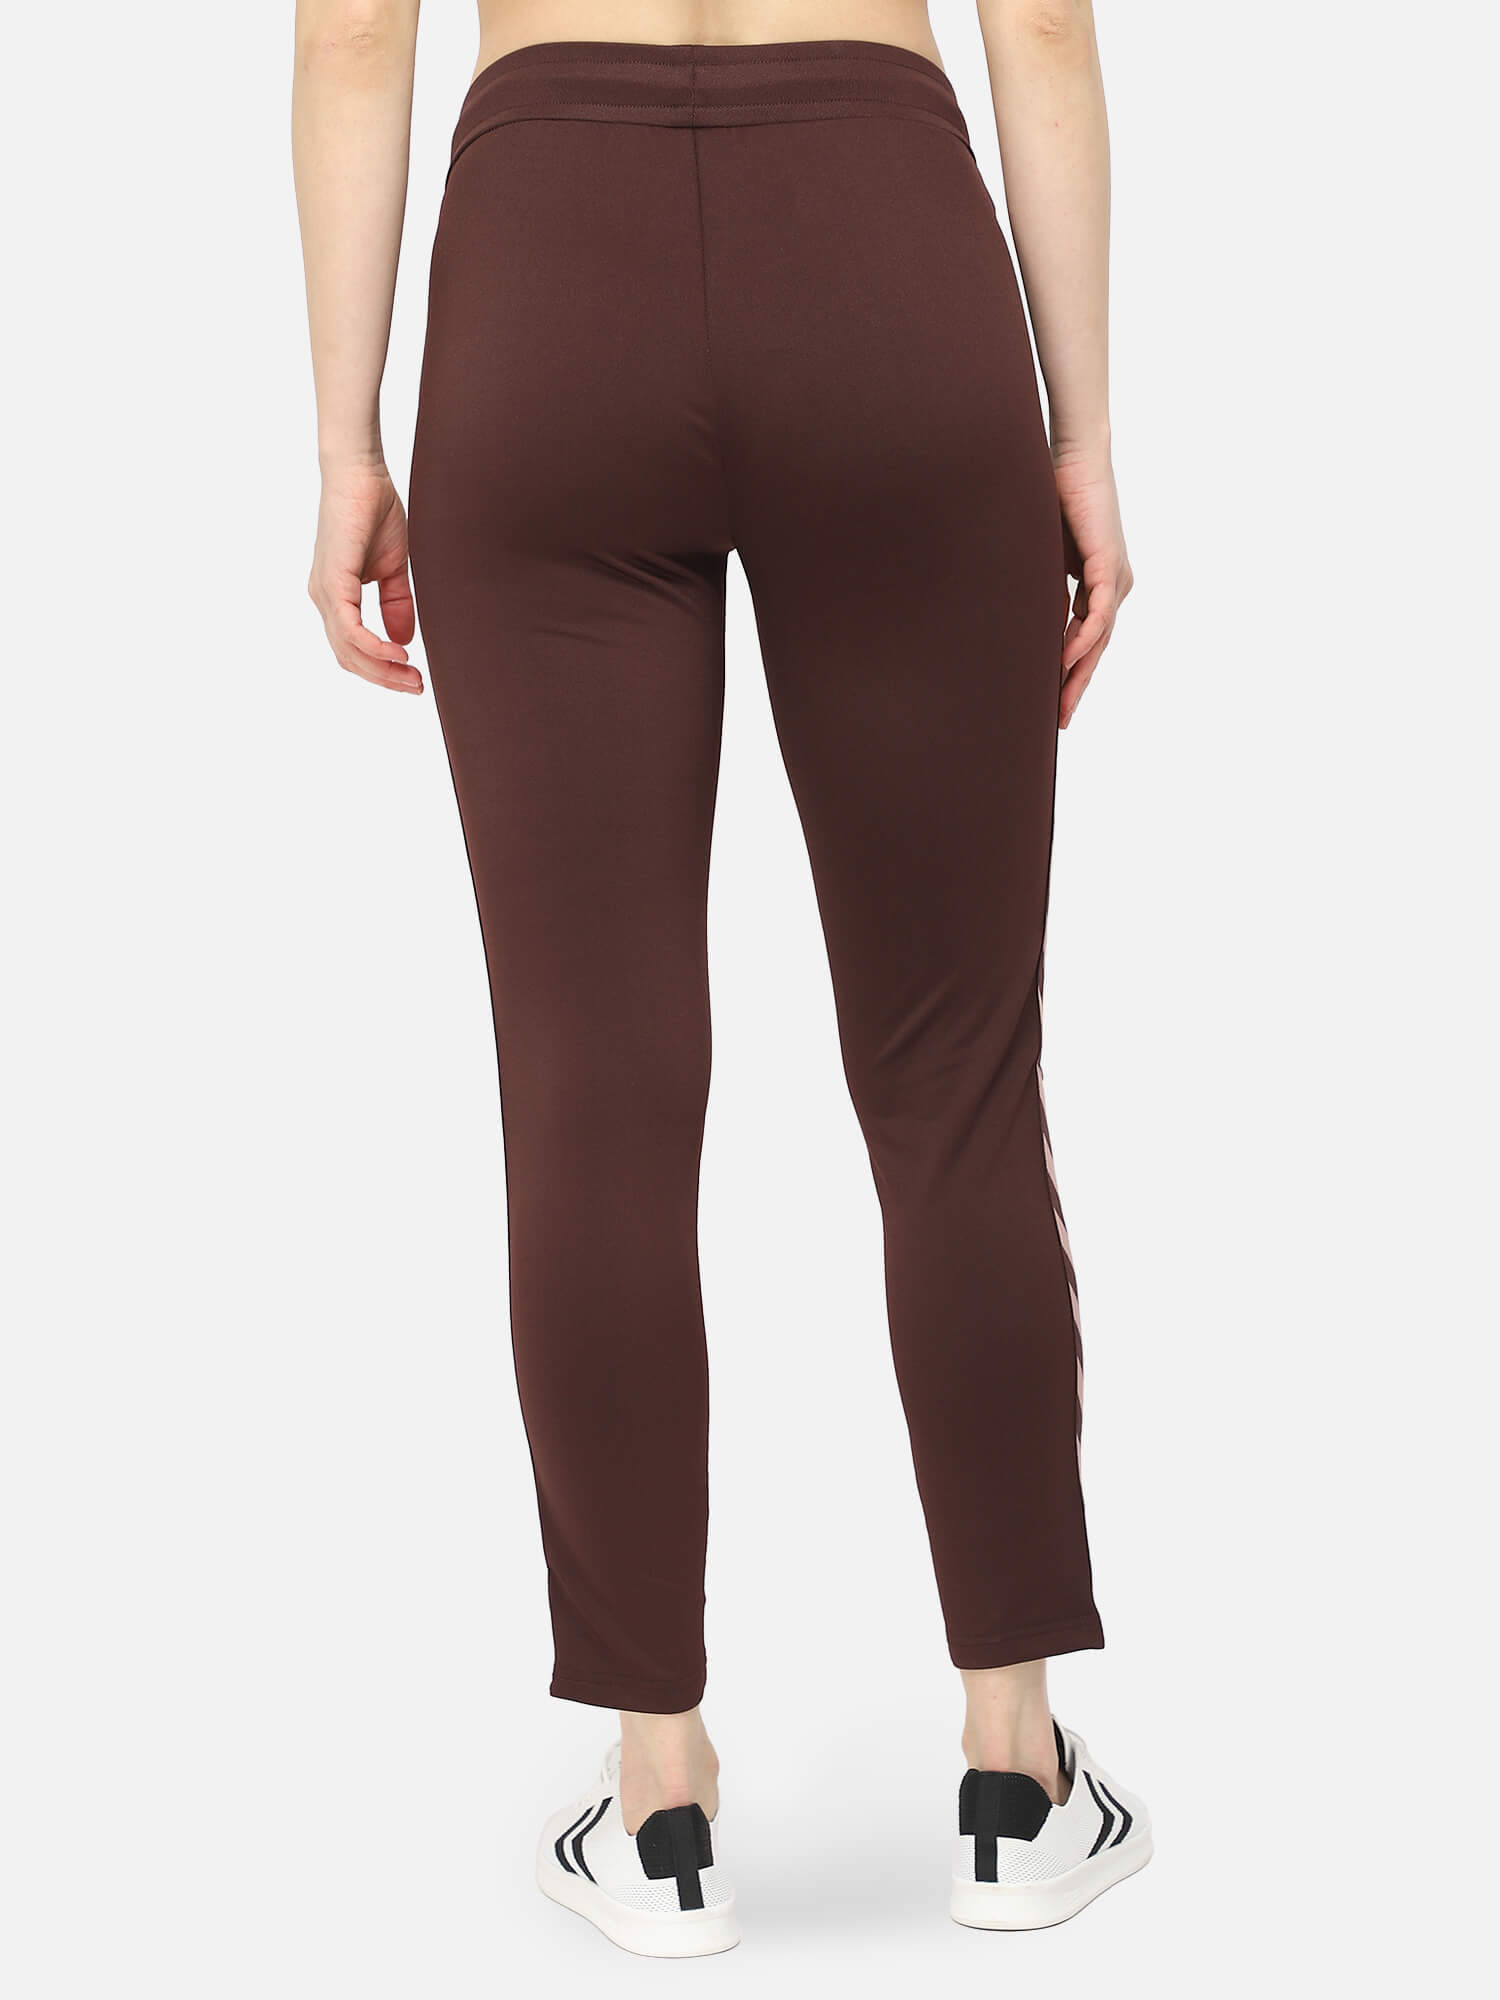 The Trends Cuts And Colors Of The Season Fall Pants for Women